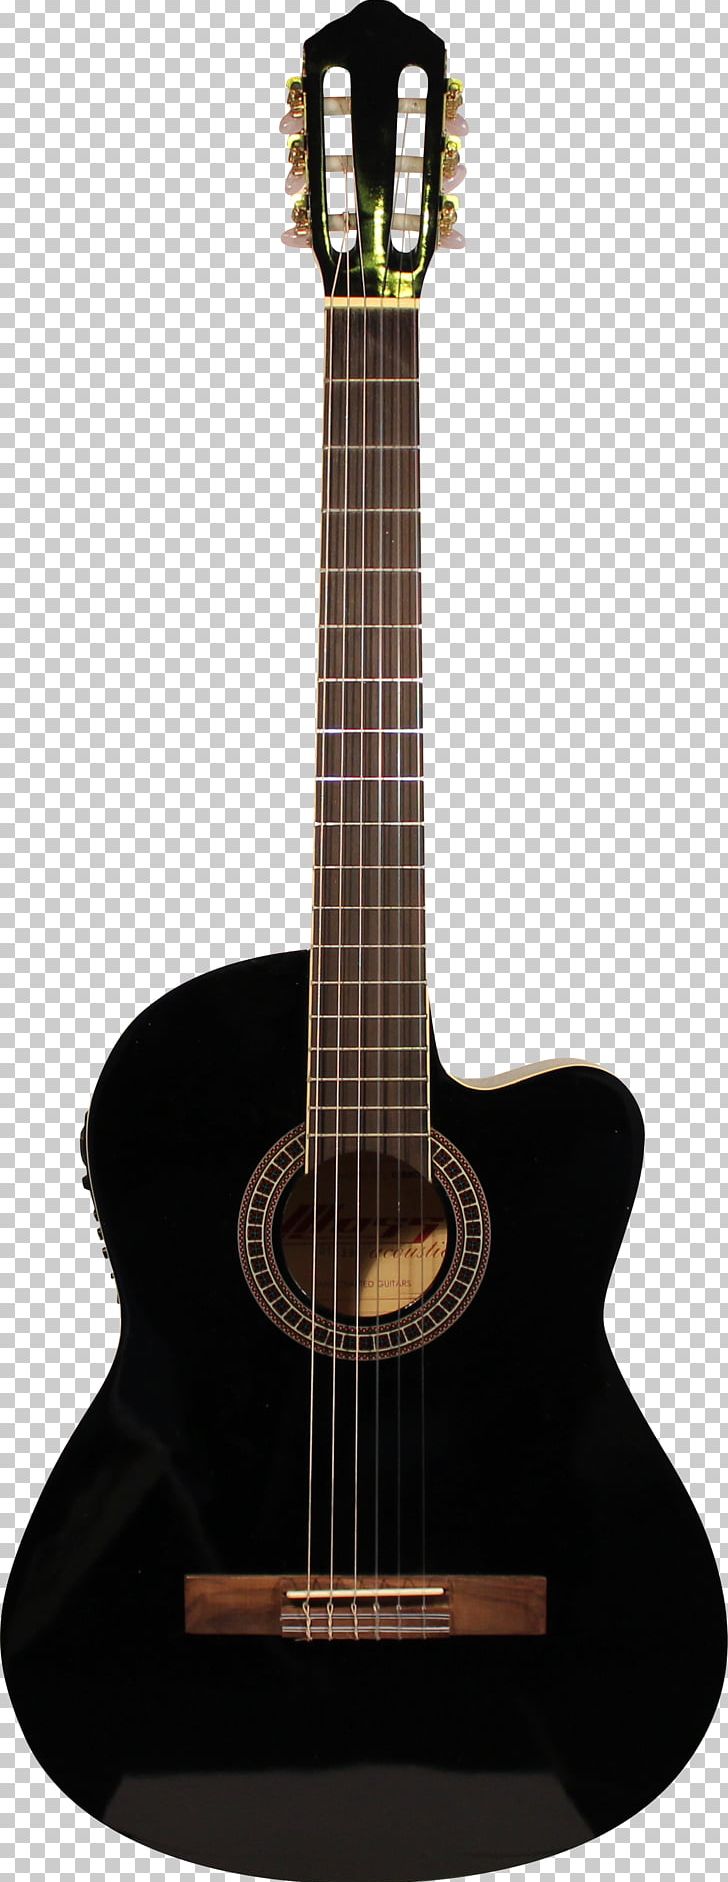 Acoustic Guitar Fender T-Bucket 300 CE Acoustic-Electric Guitar Dreadnought PNG, Clipart, Cuatro, Cutaway, Guitar Accessory, Music, Musical Instrument Free PNG Download